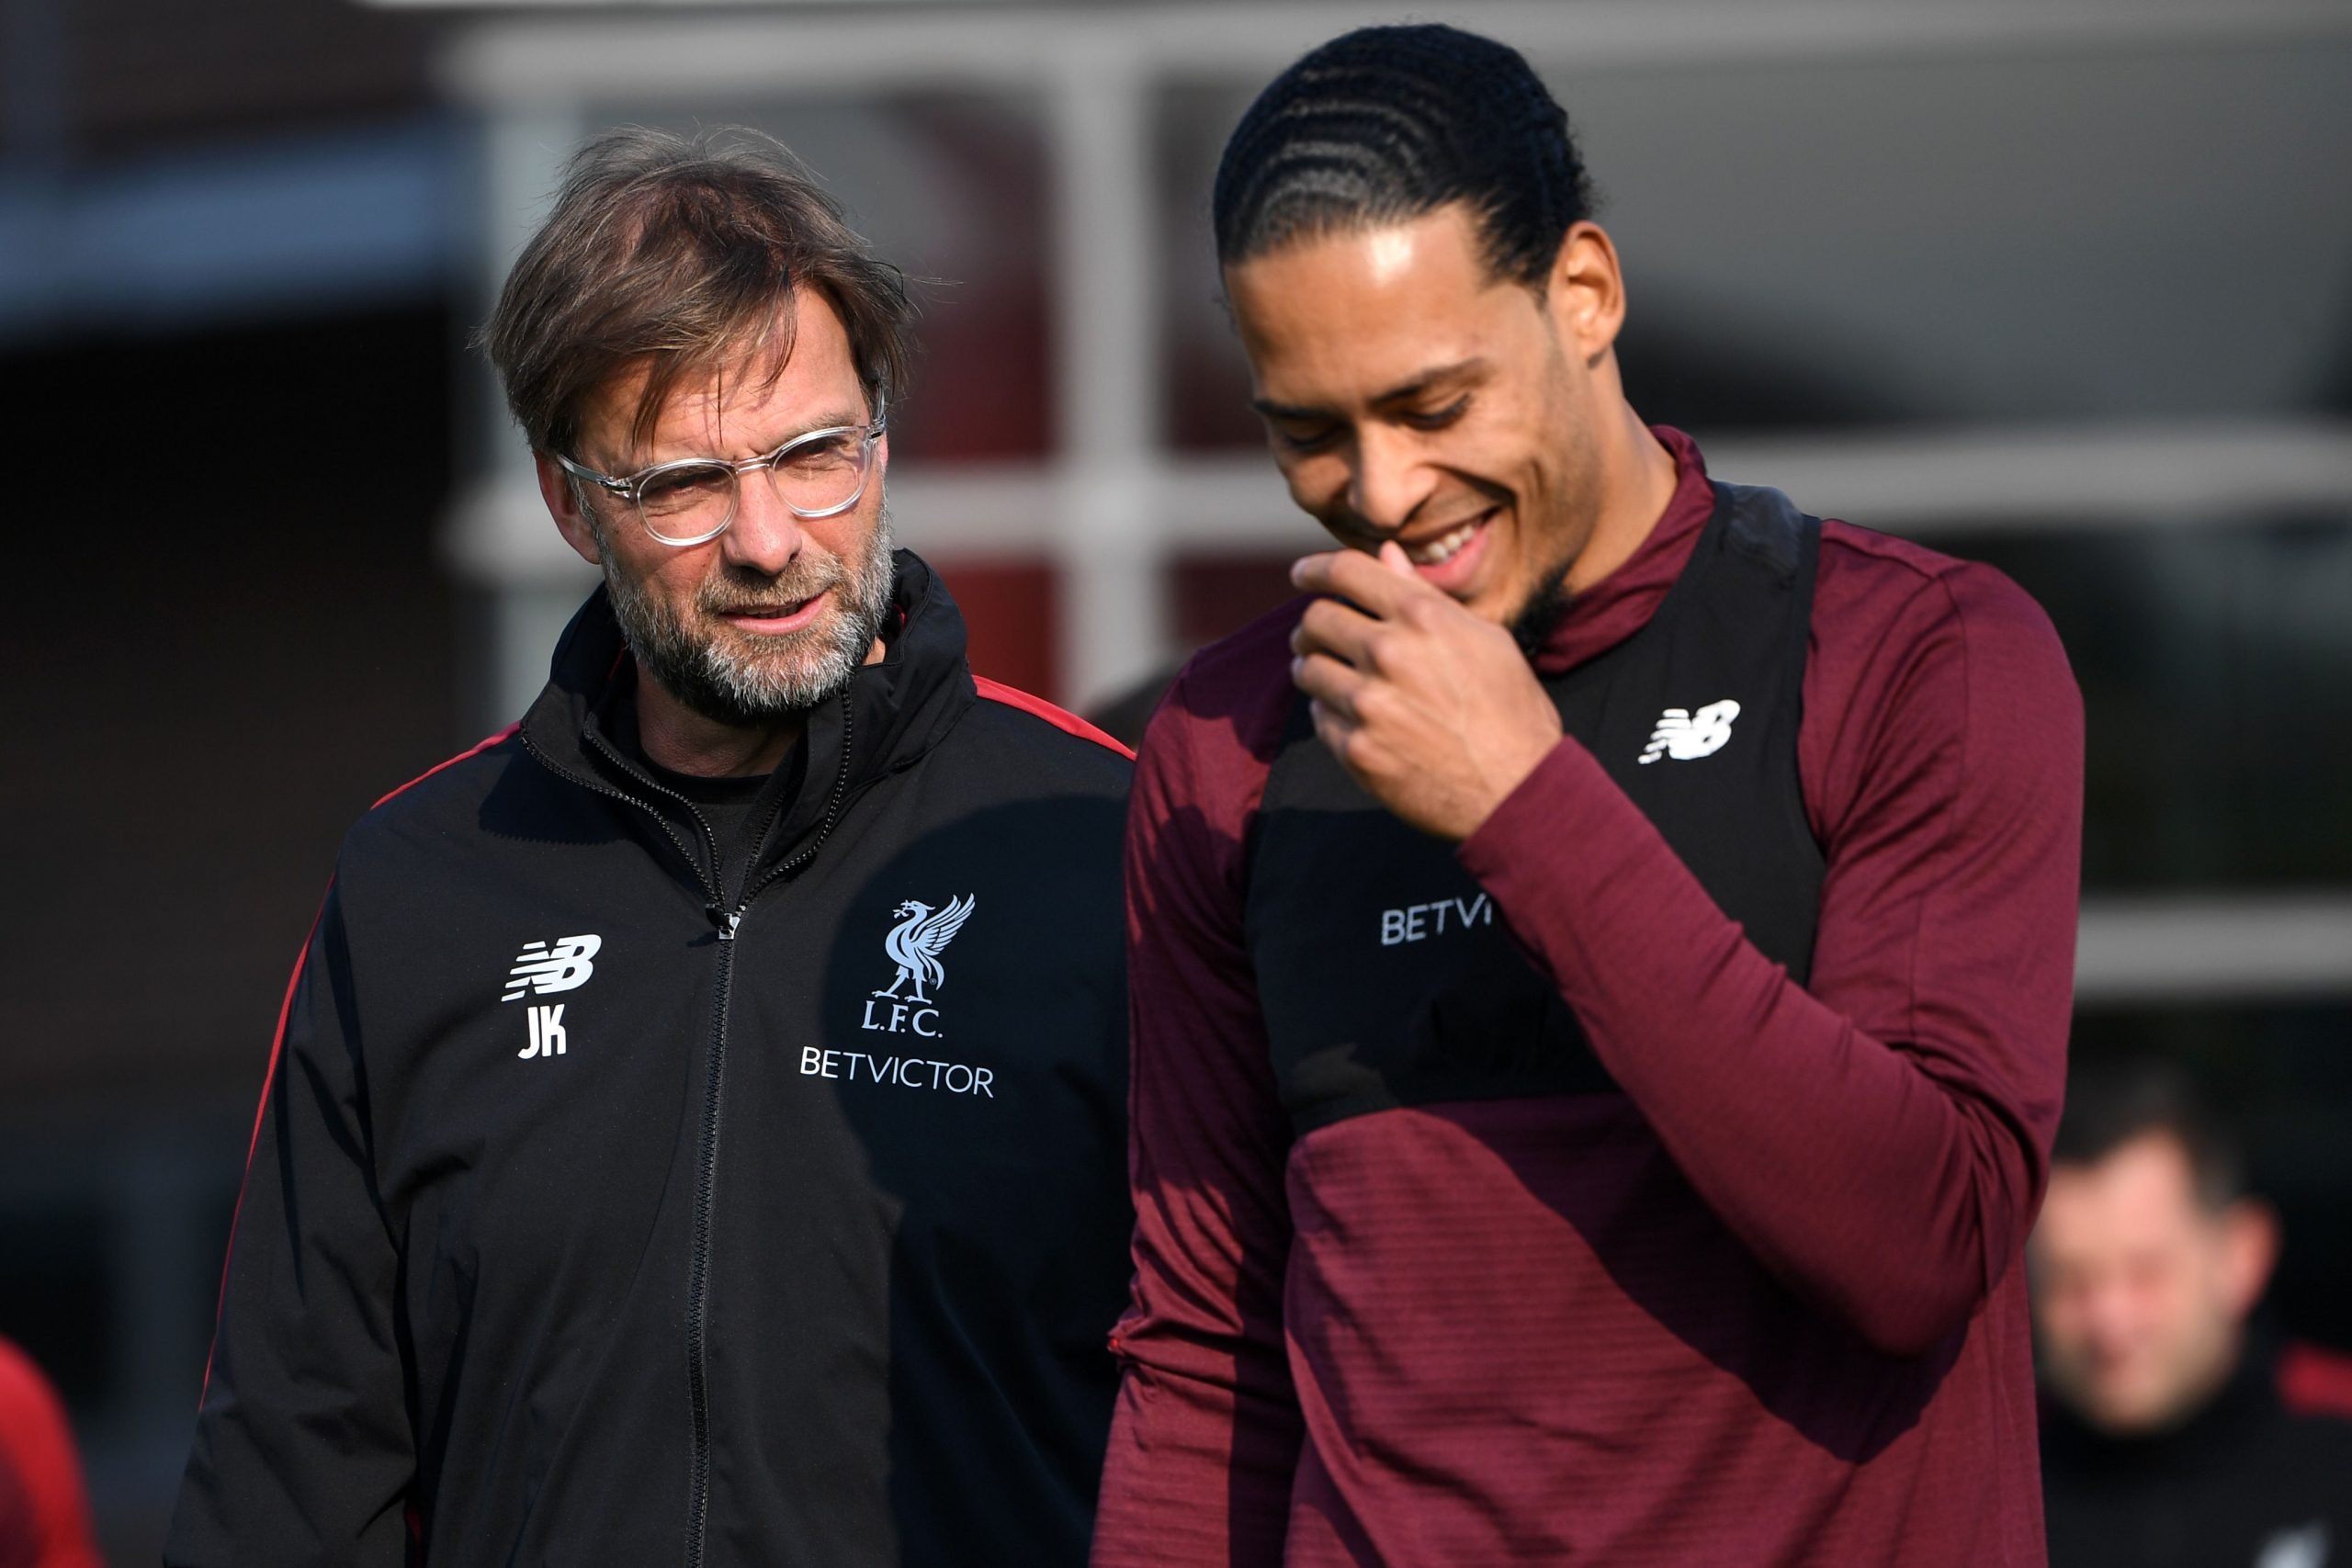 Liverpool's German manager Jurgen Klopp (L) chats with Liverpool's Dutch defender Virgil van Dijk (R) during a Liverpool team training session at Melwood in Liverpool, north west England on April 8, 2019, on the eve of their UEFA Champions League quarter final first leg football match against Porto. (Photo by Paul ELLIS / AFP)